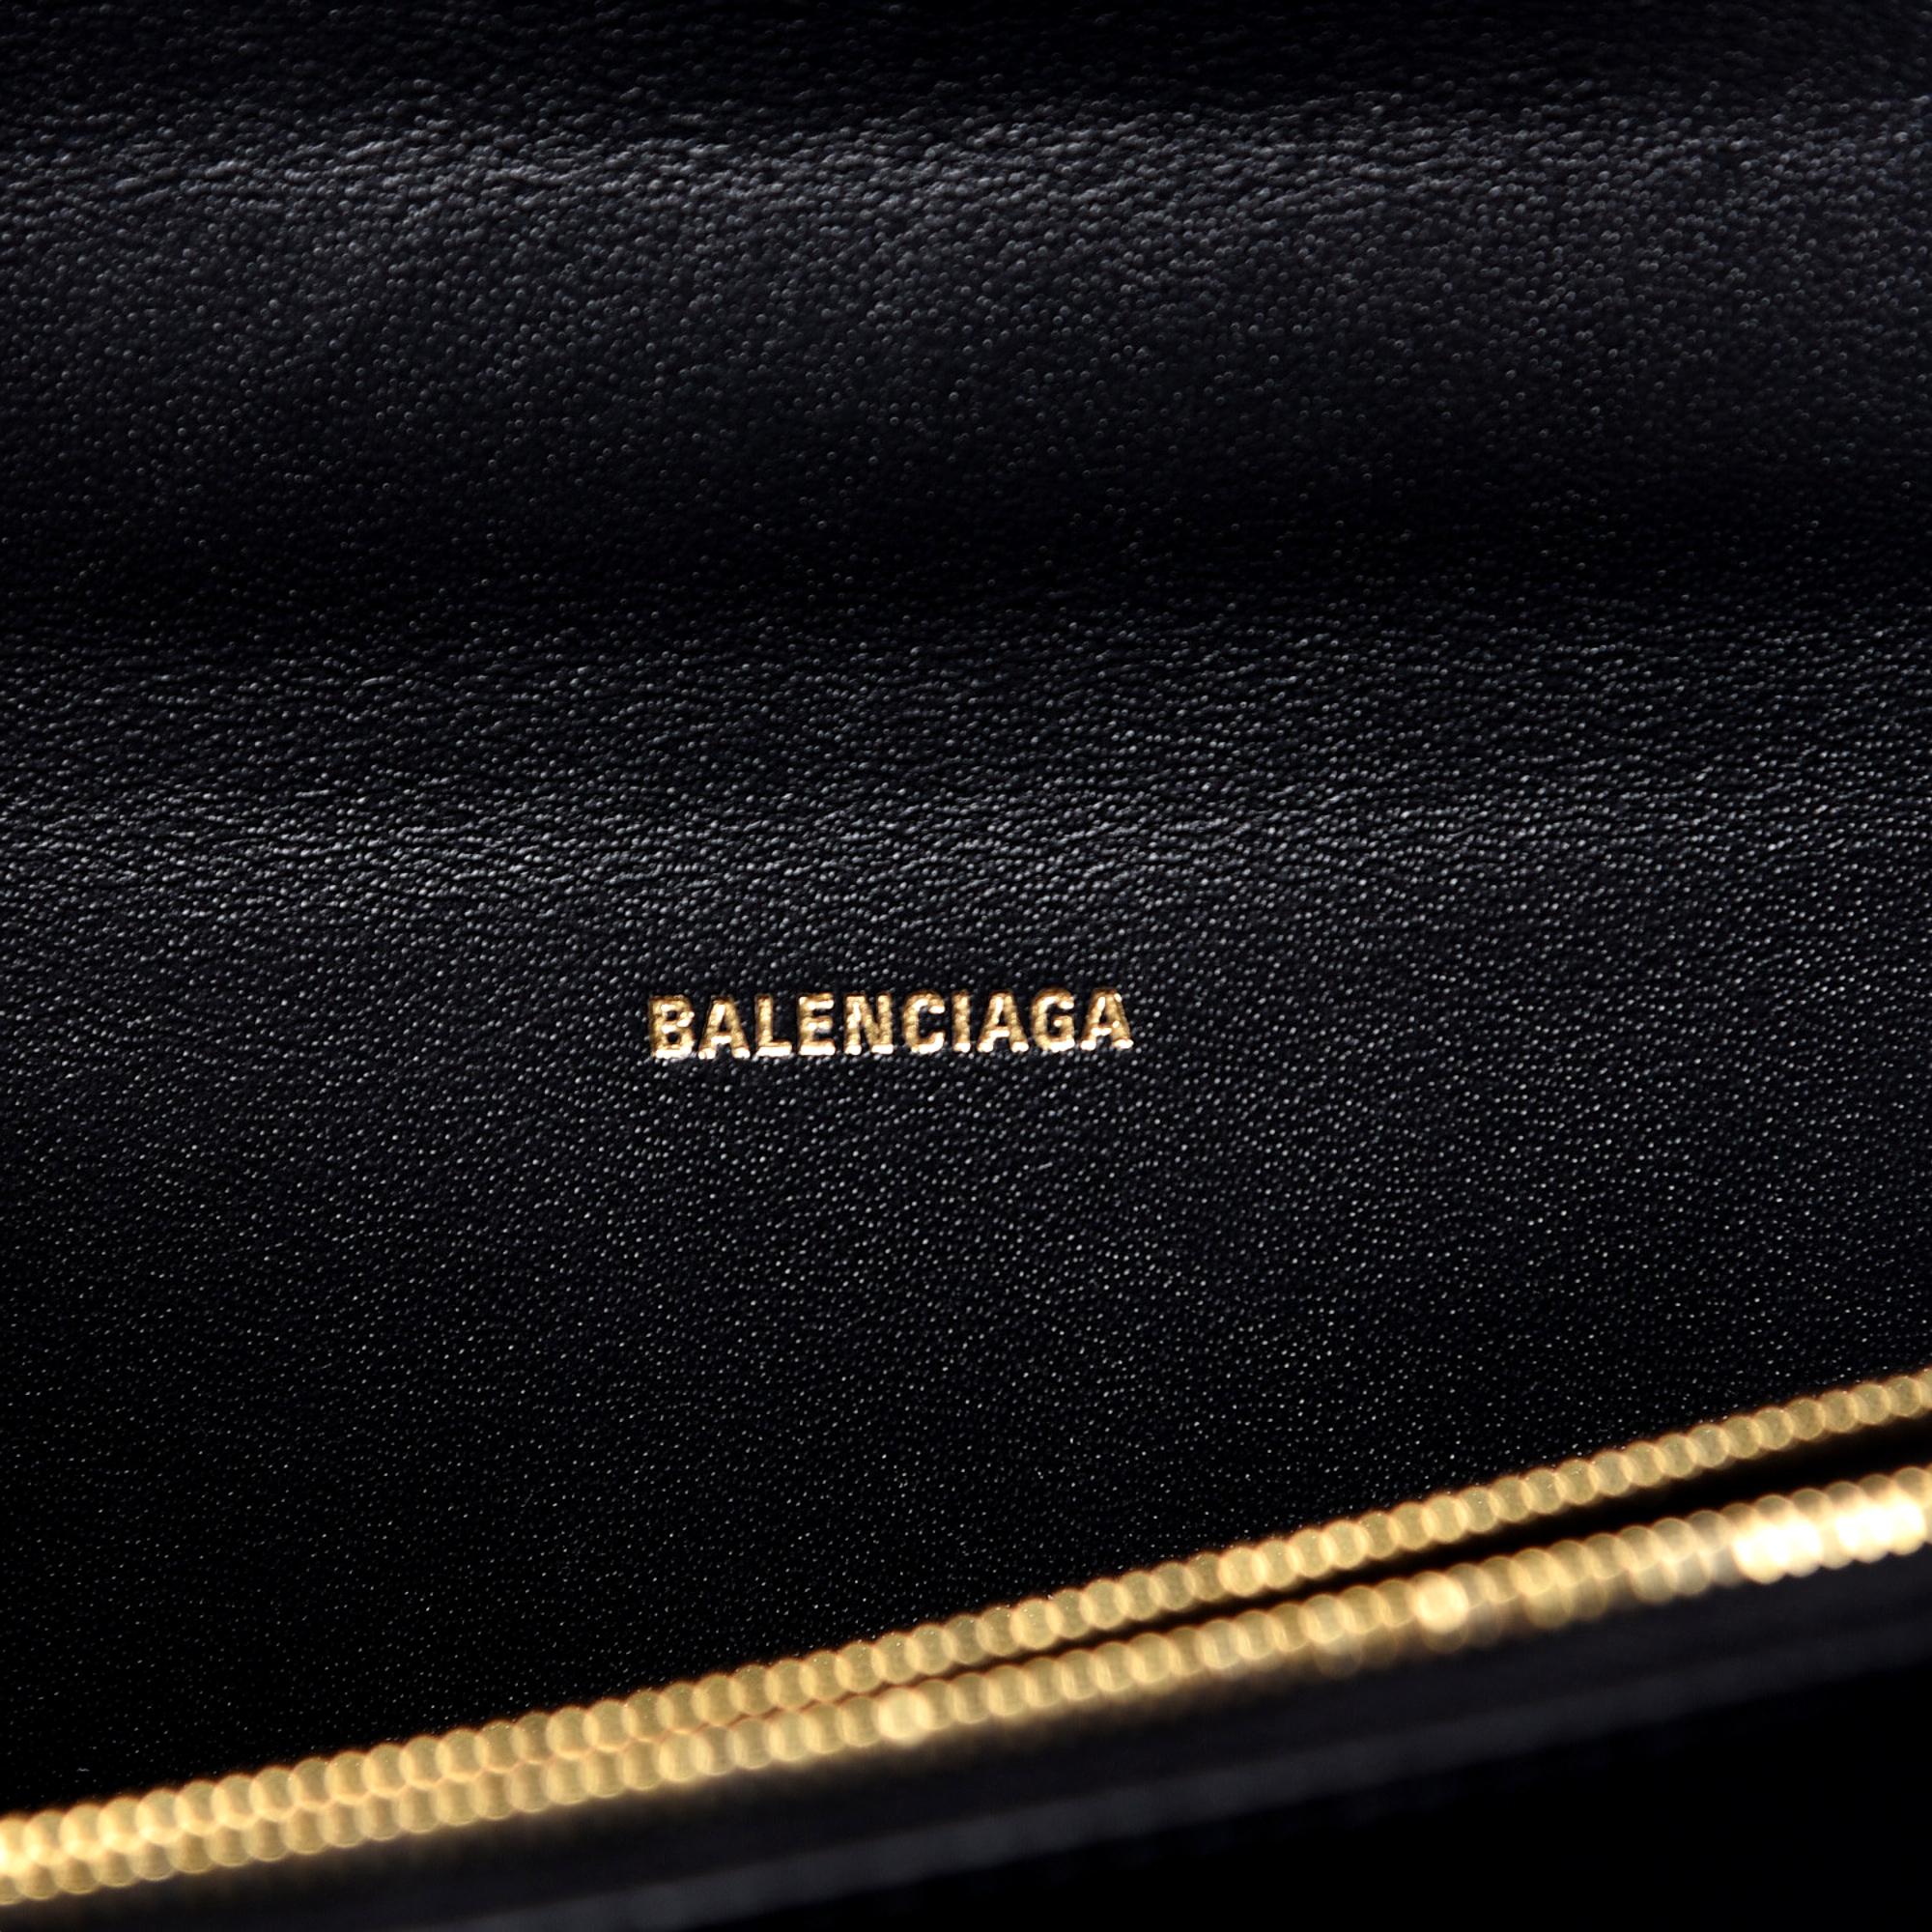 Balenciaga S Sharp Smooth Calfskin Leather Box Shoulder Bag 580641 at_Queen_Bee_of_Beverly_Hills